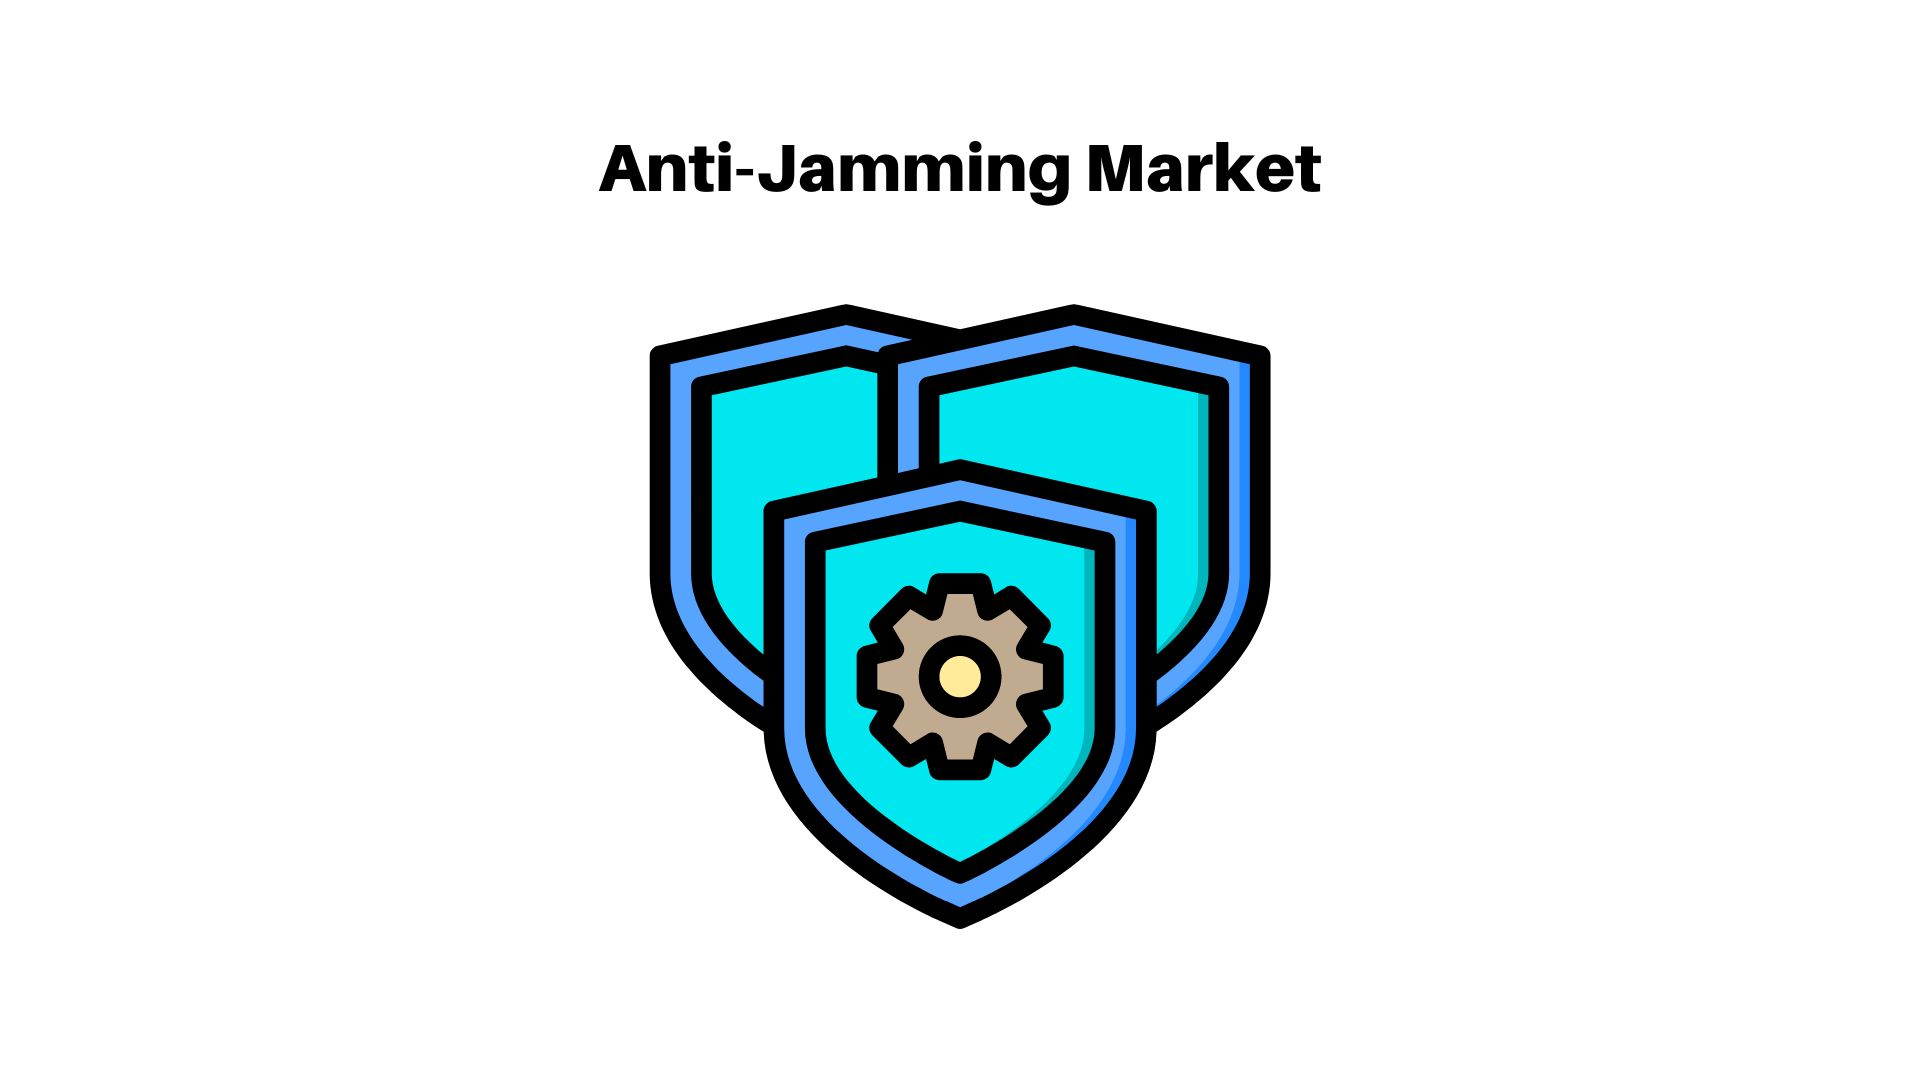 Anti-Jamming Market Expected Value of USD 4.66 Bn in 2023 | CAGR of 7.9%